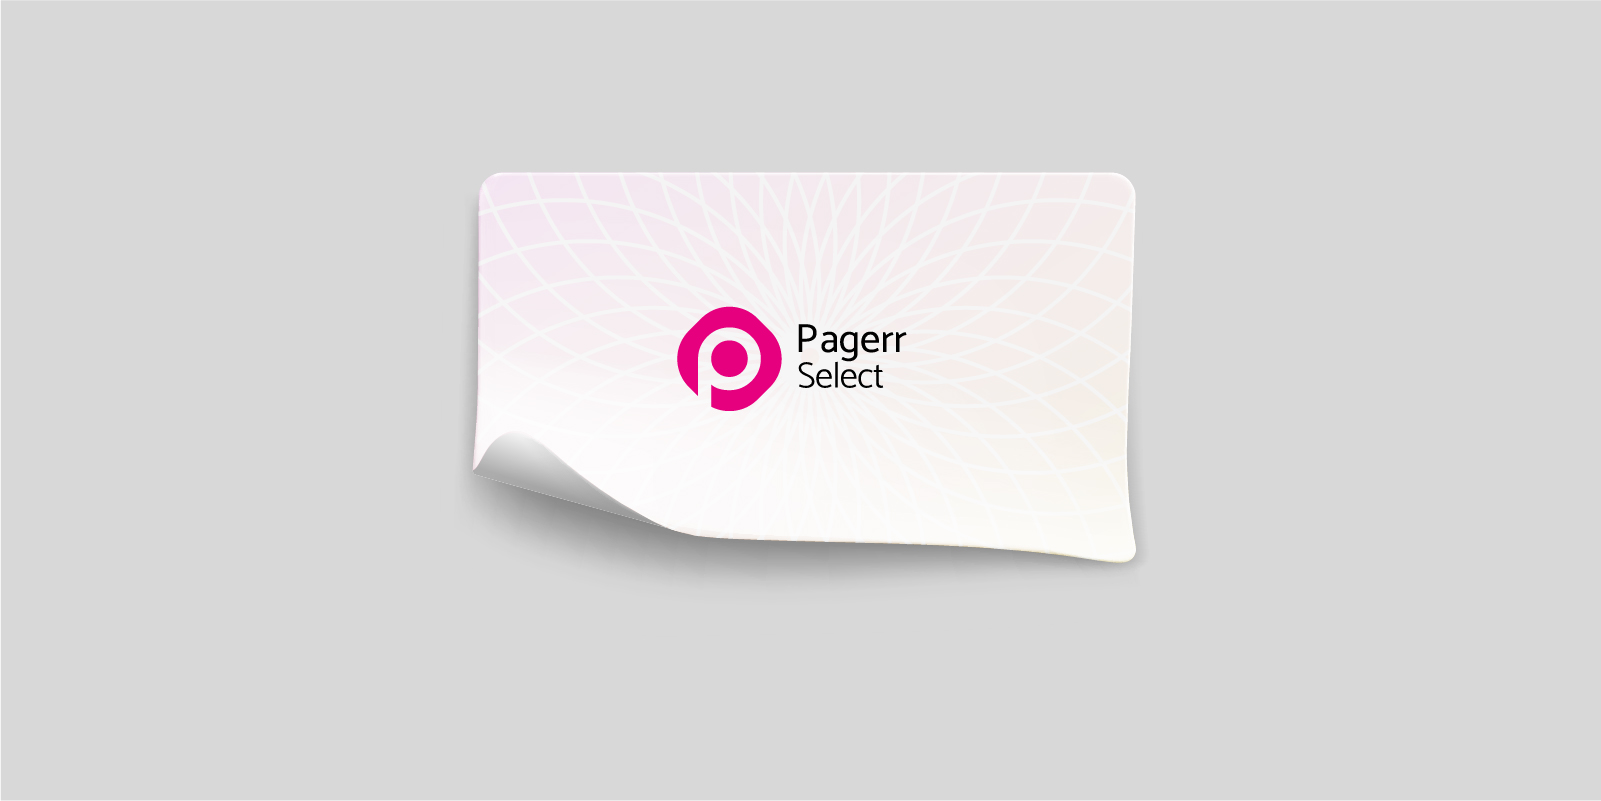 Sheet stickers in Brisbane - Print with Pagerr